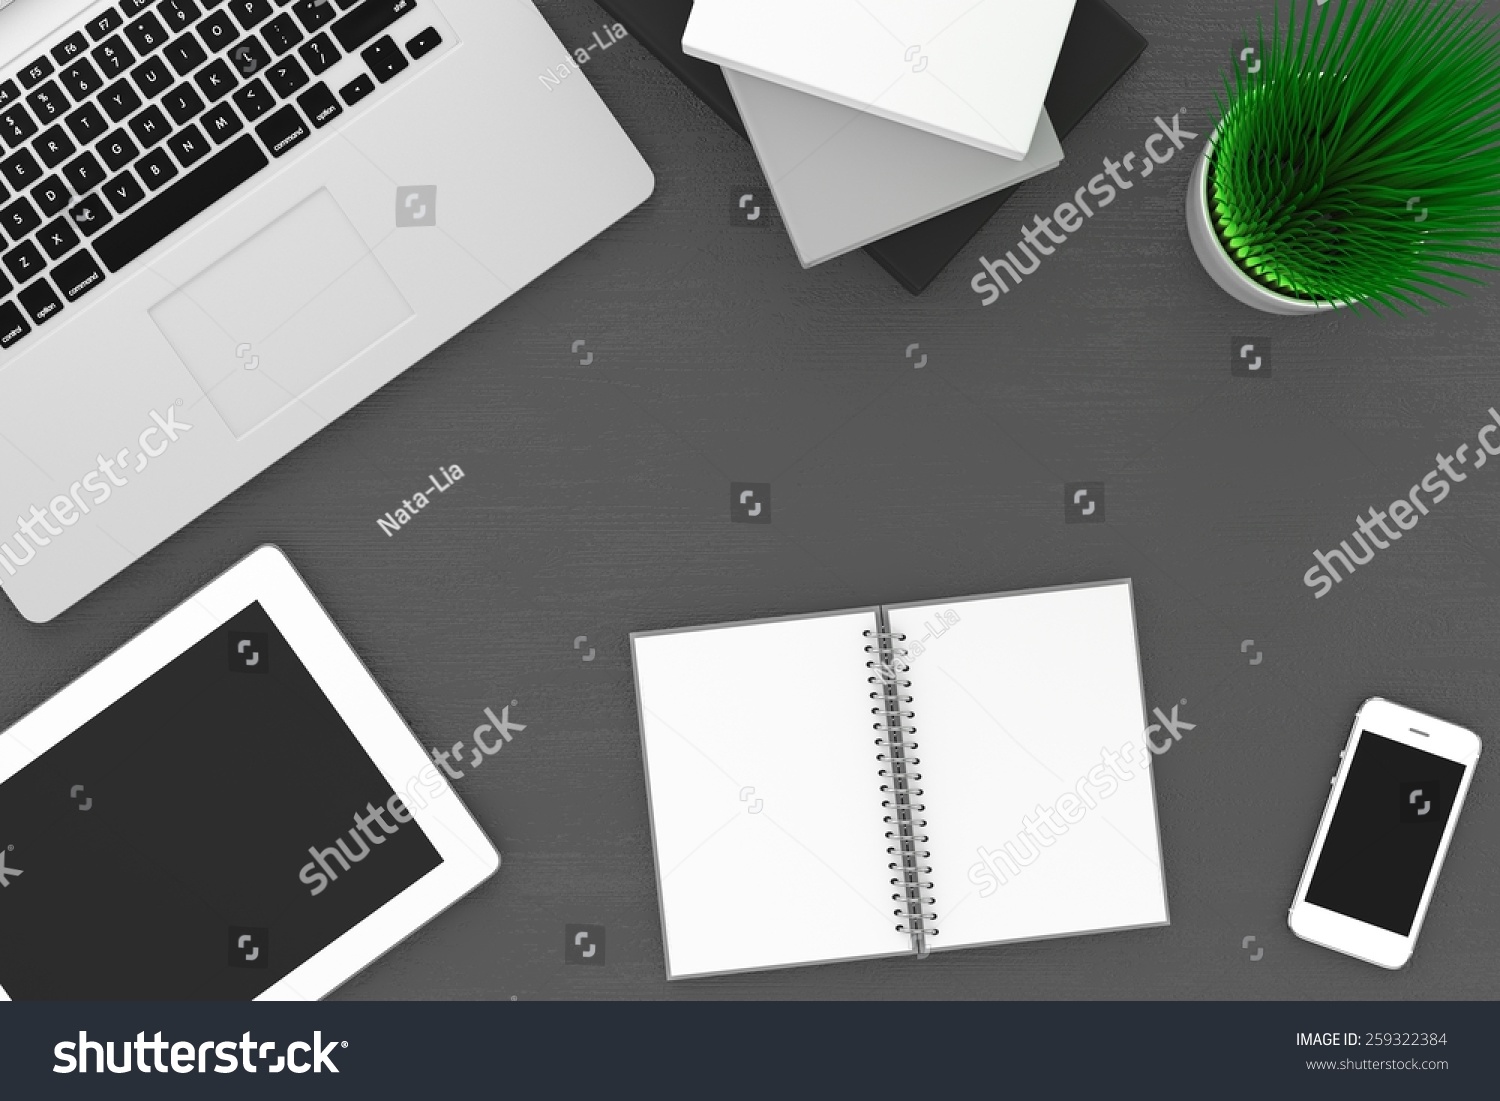 Workplace Top View Stock Illustration 259322384 | Shutterstock